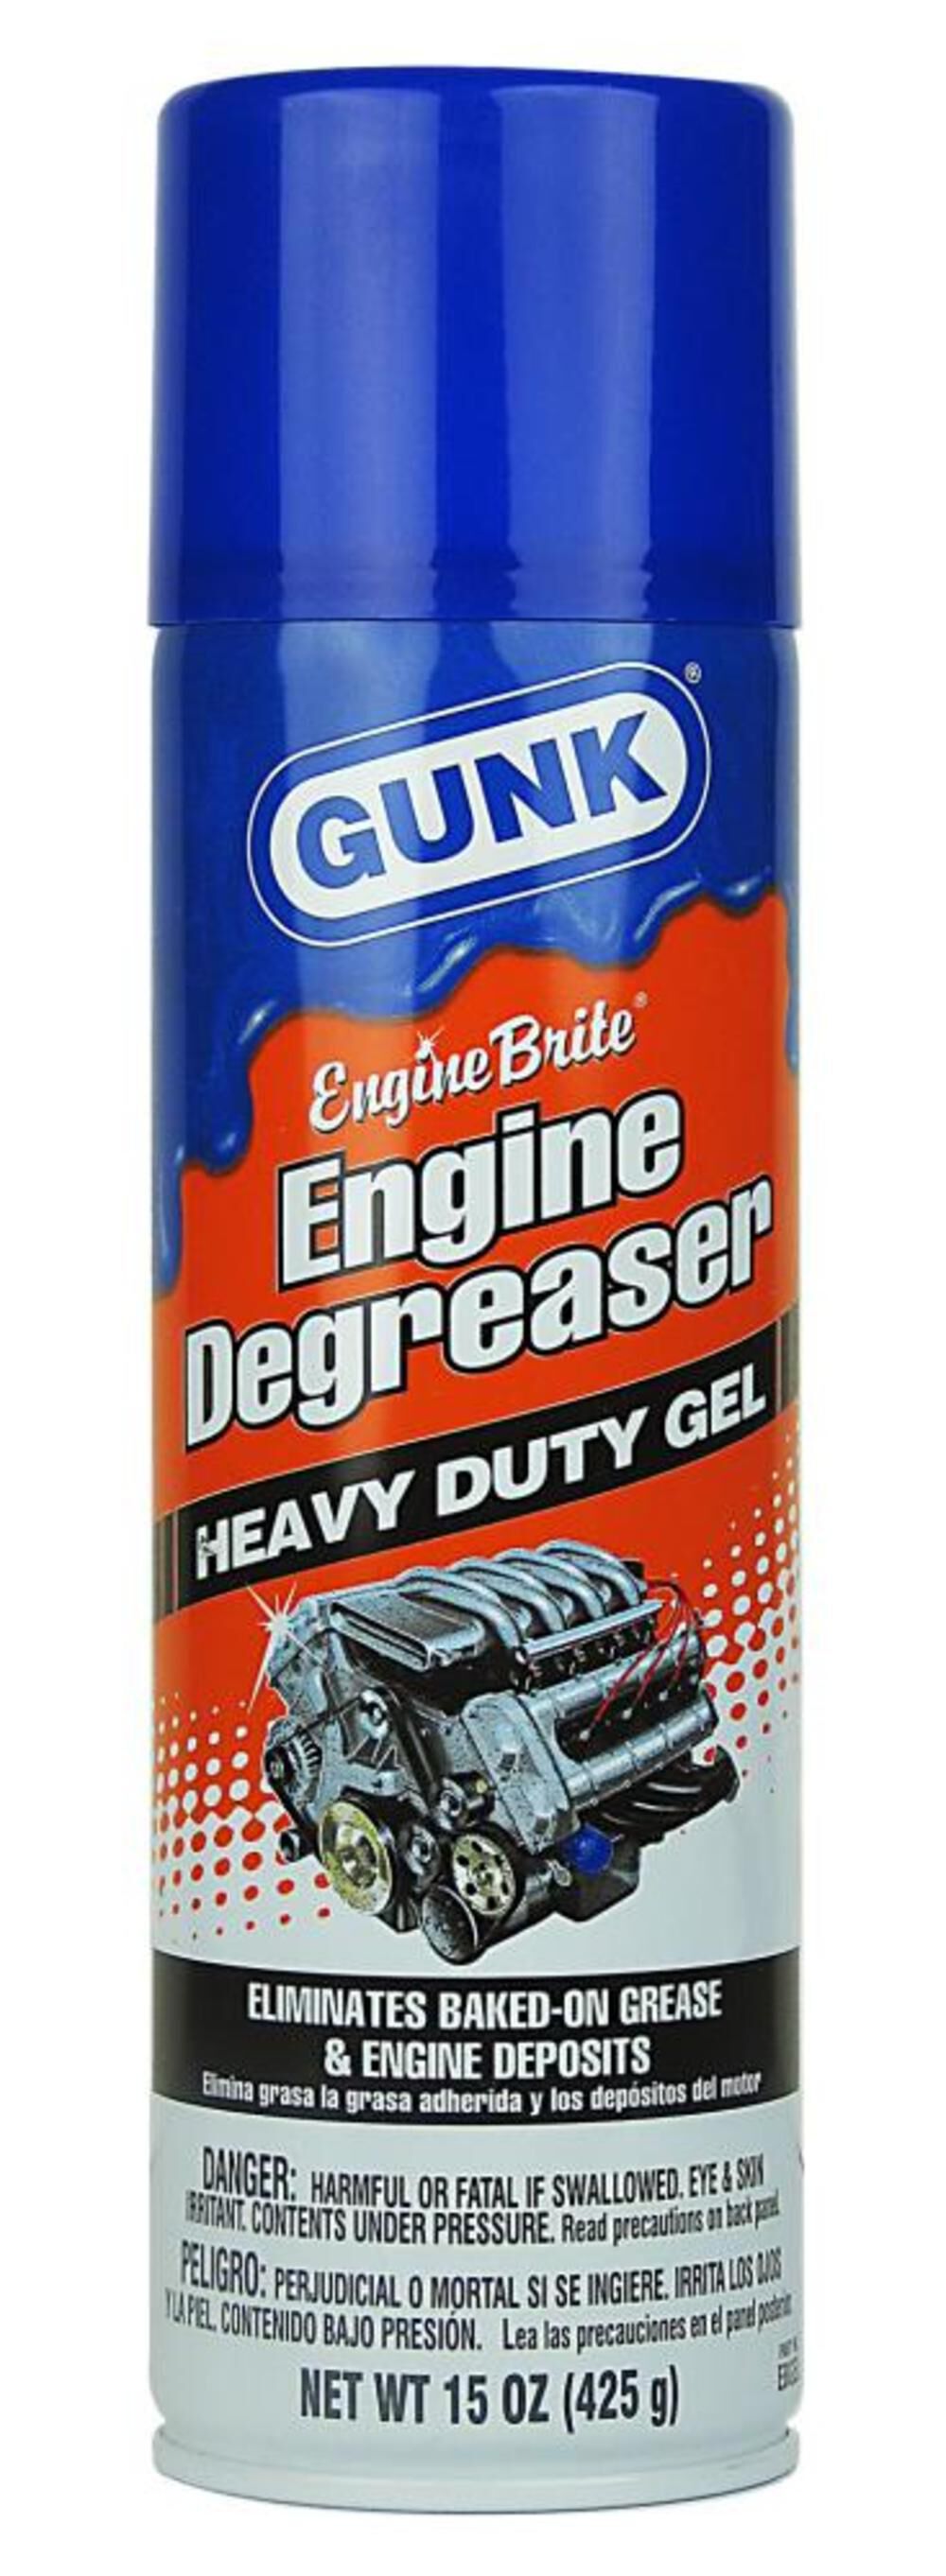 Gunk Engine Cleaner Degreaser Review 